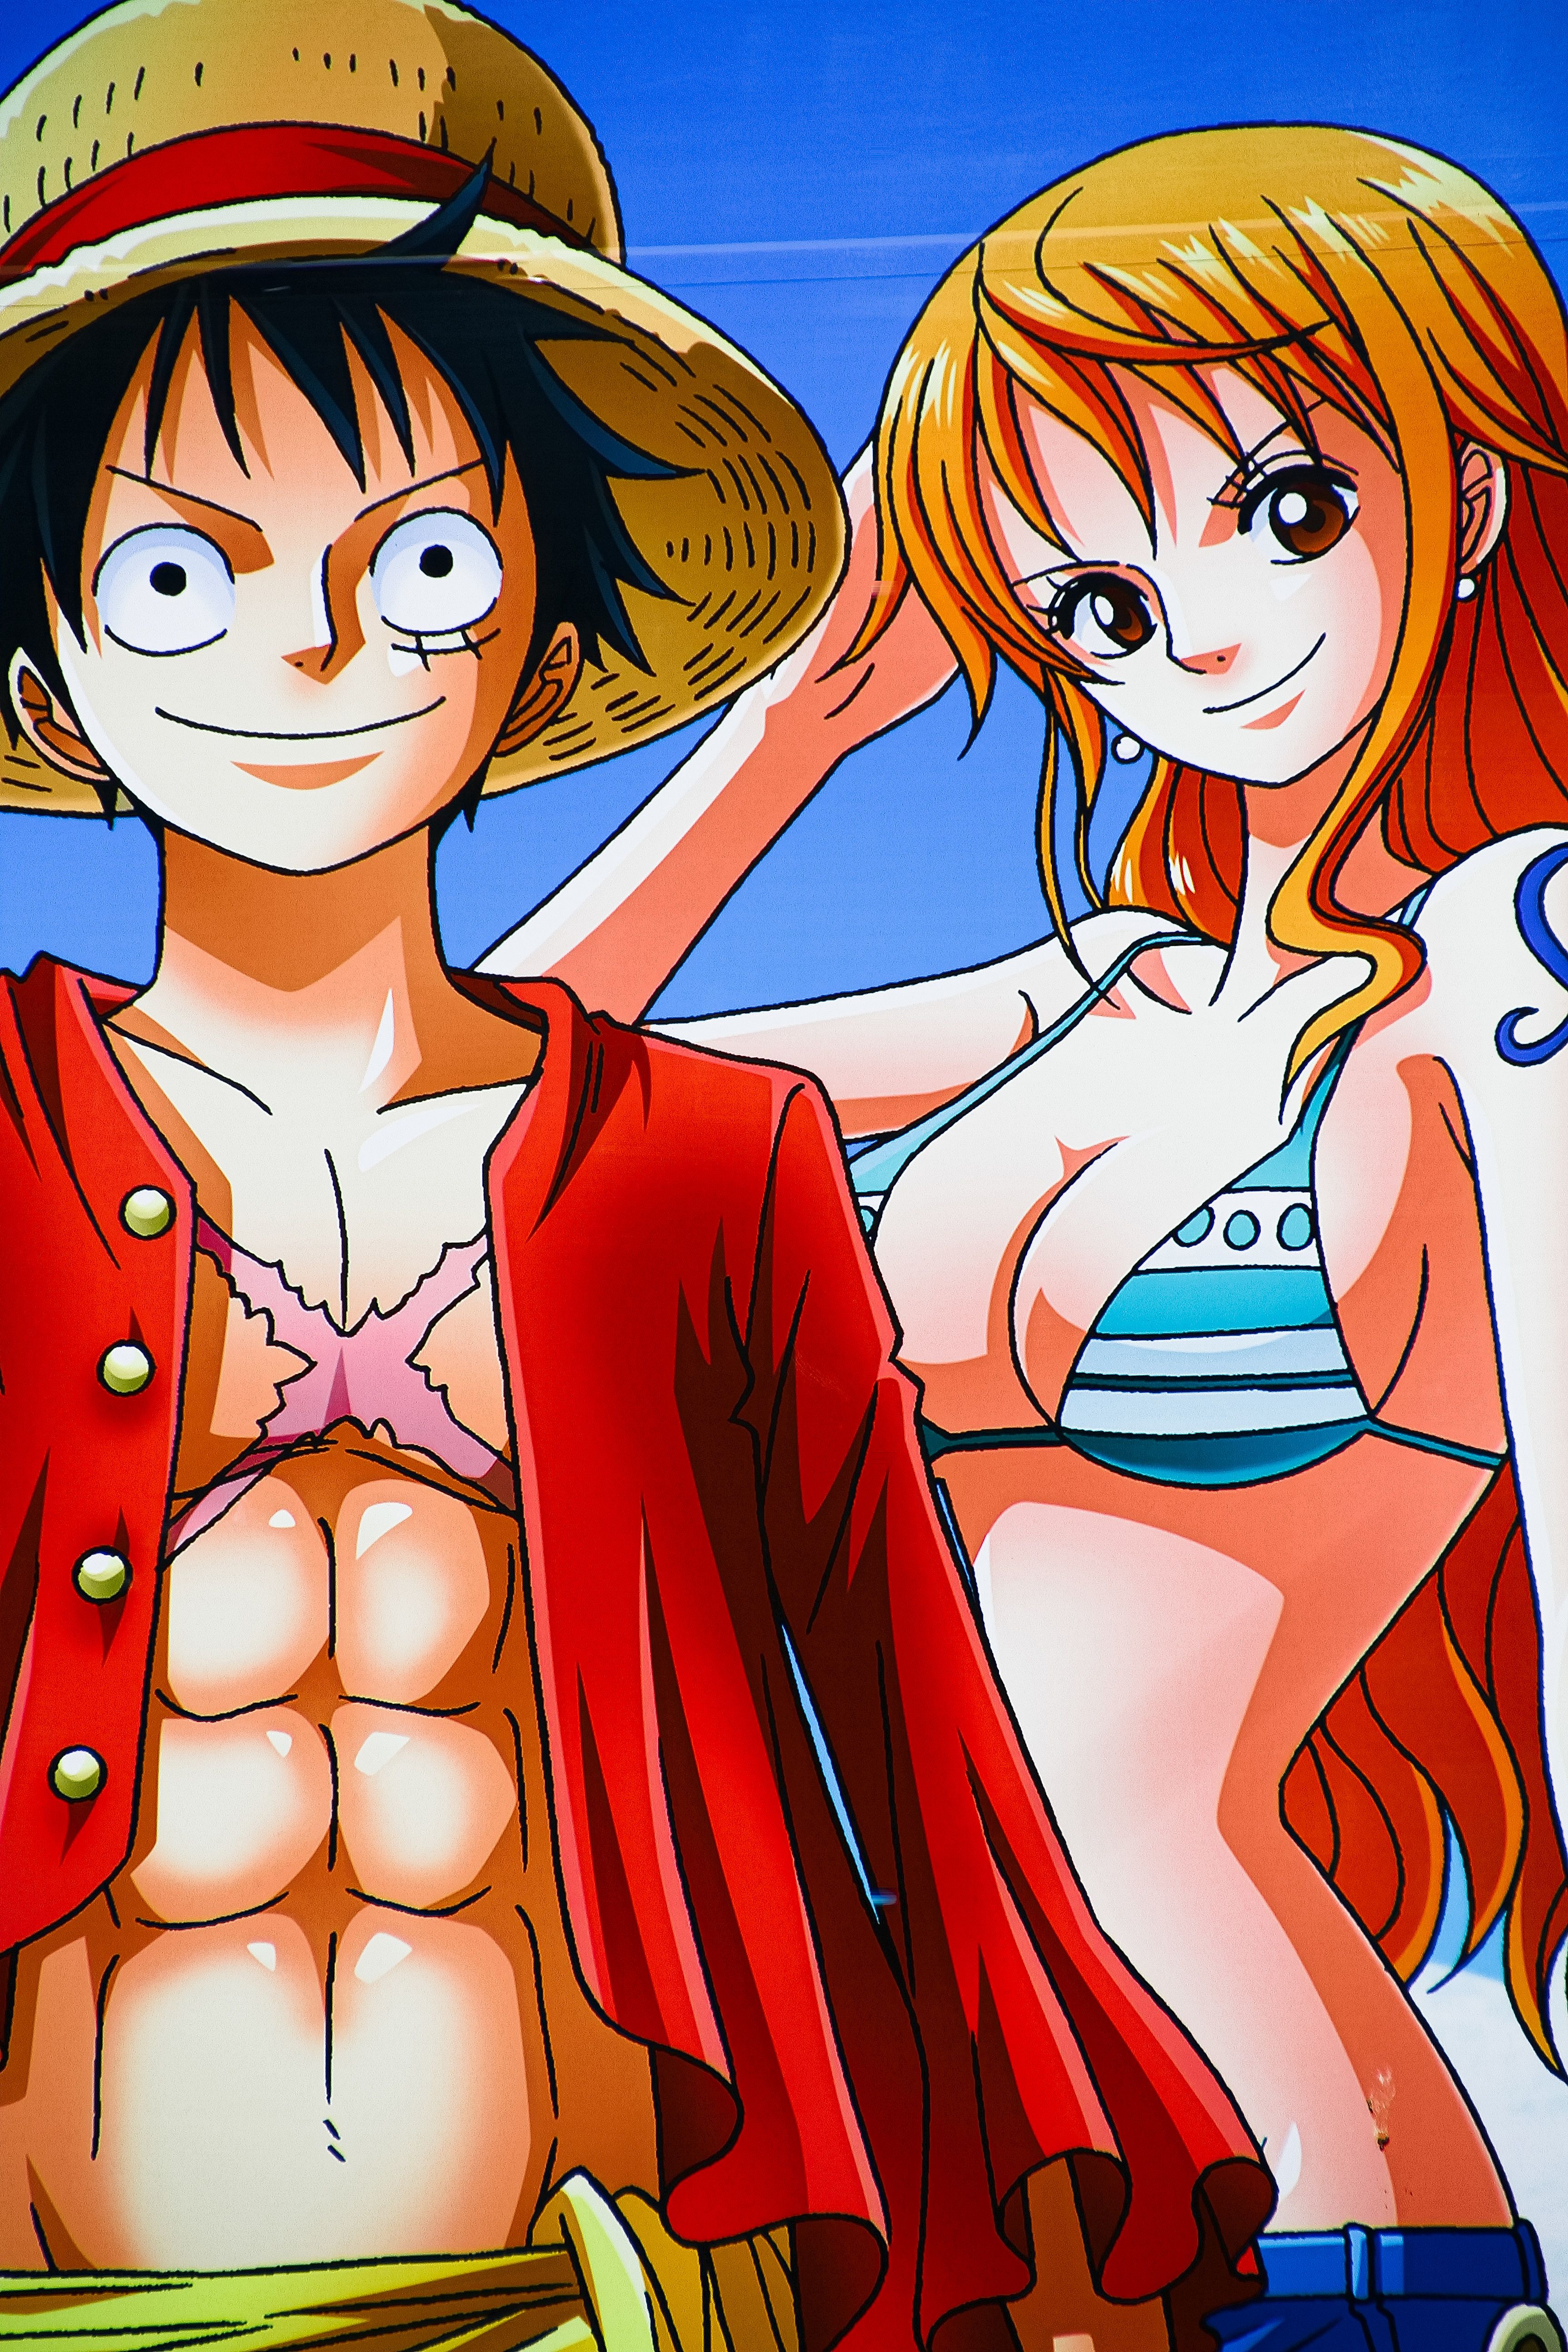 Luffy and Nami posing together